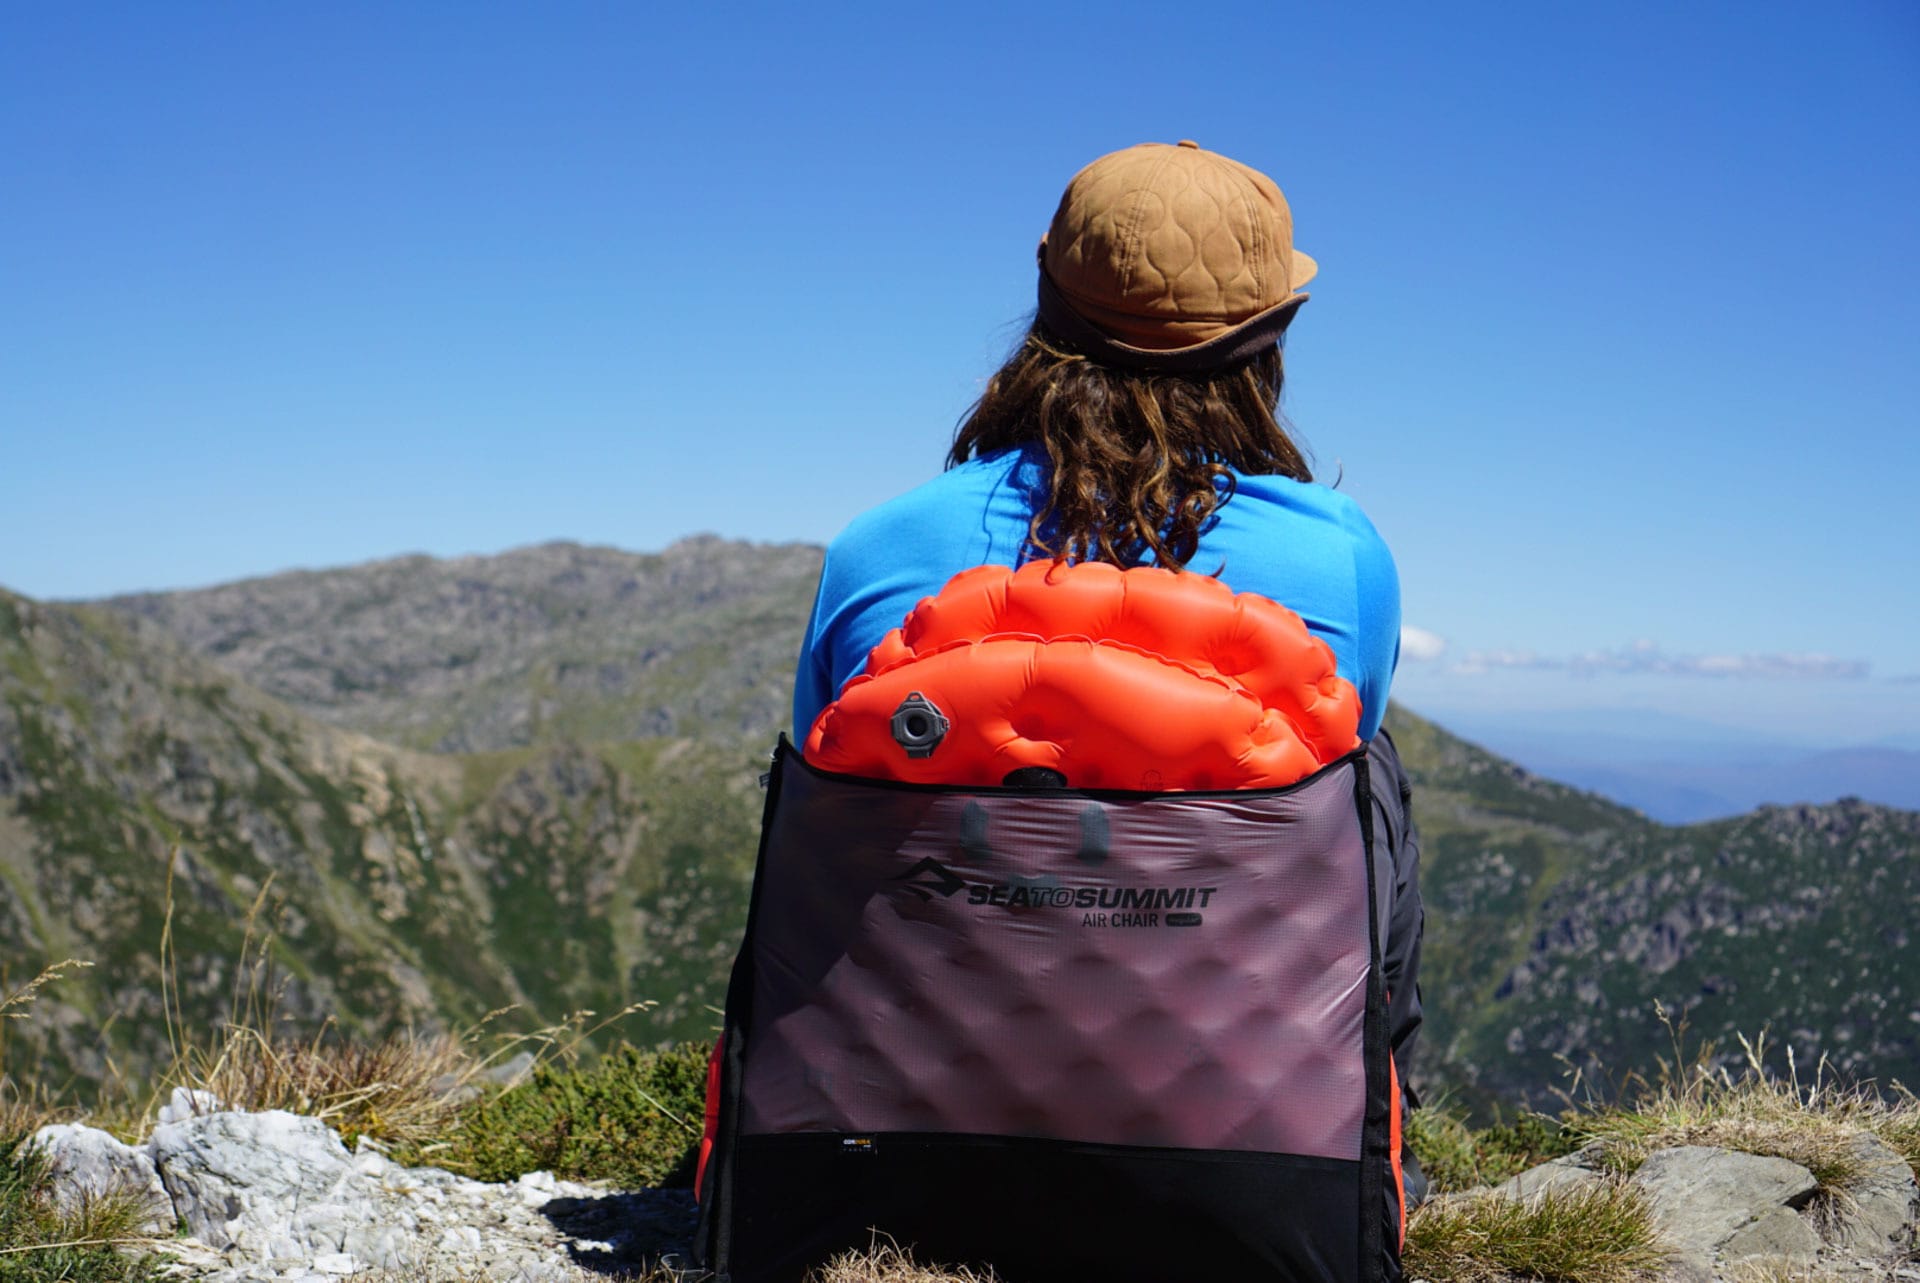 Sea to Summit Ultralight Camp Chair / Mattress Combo Review